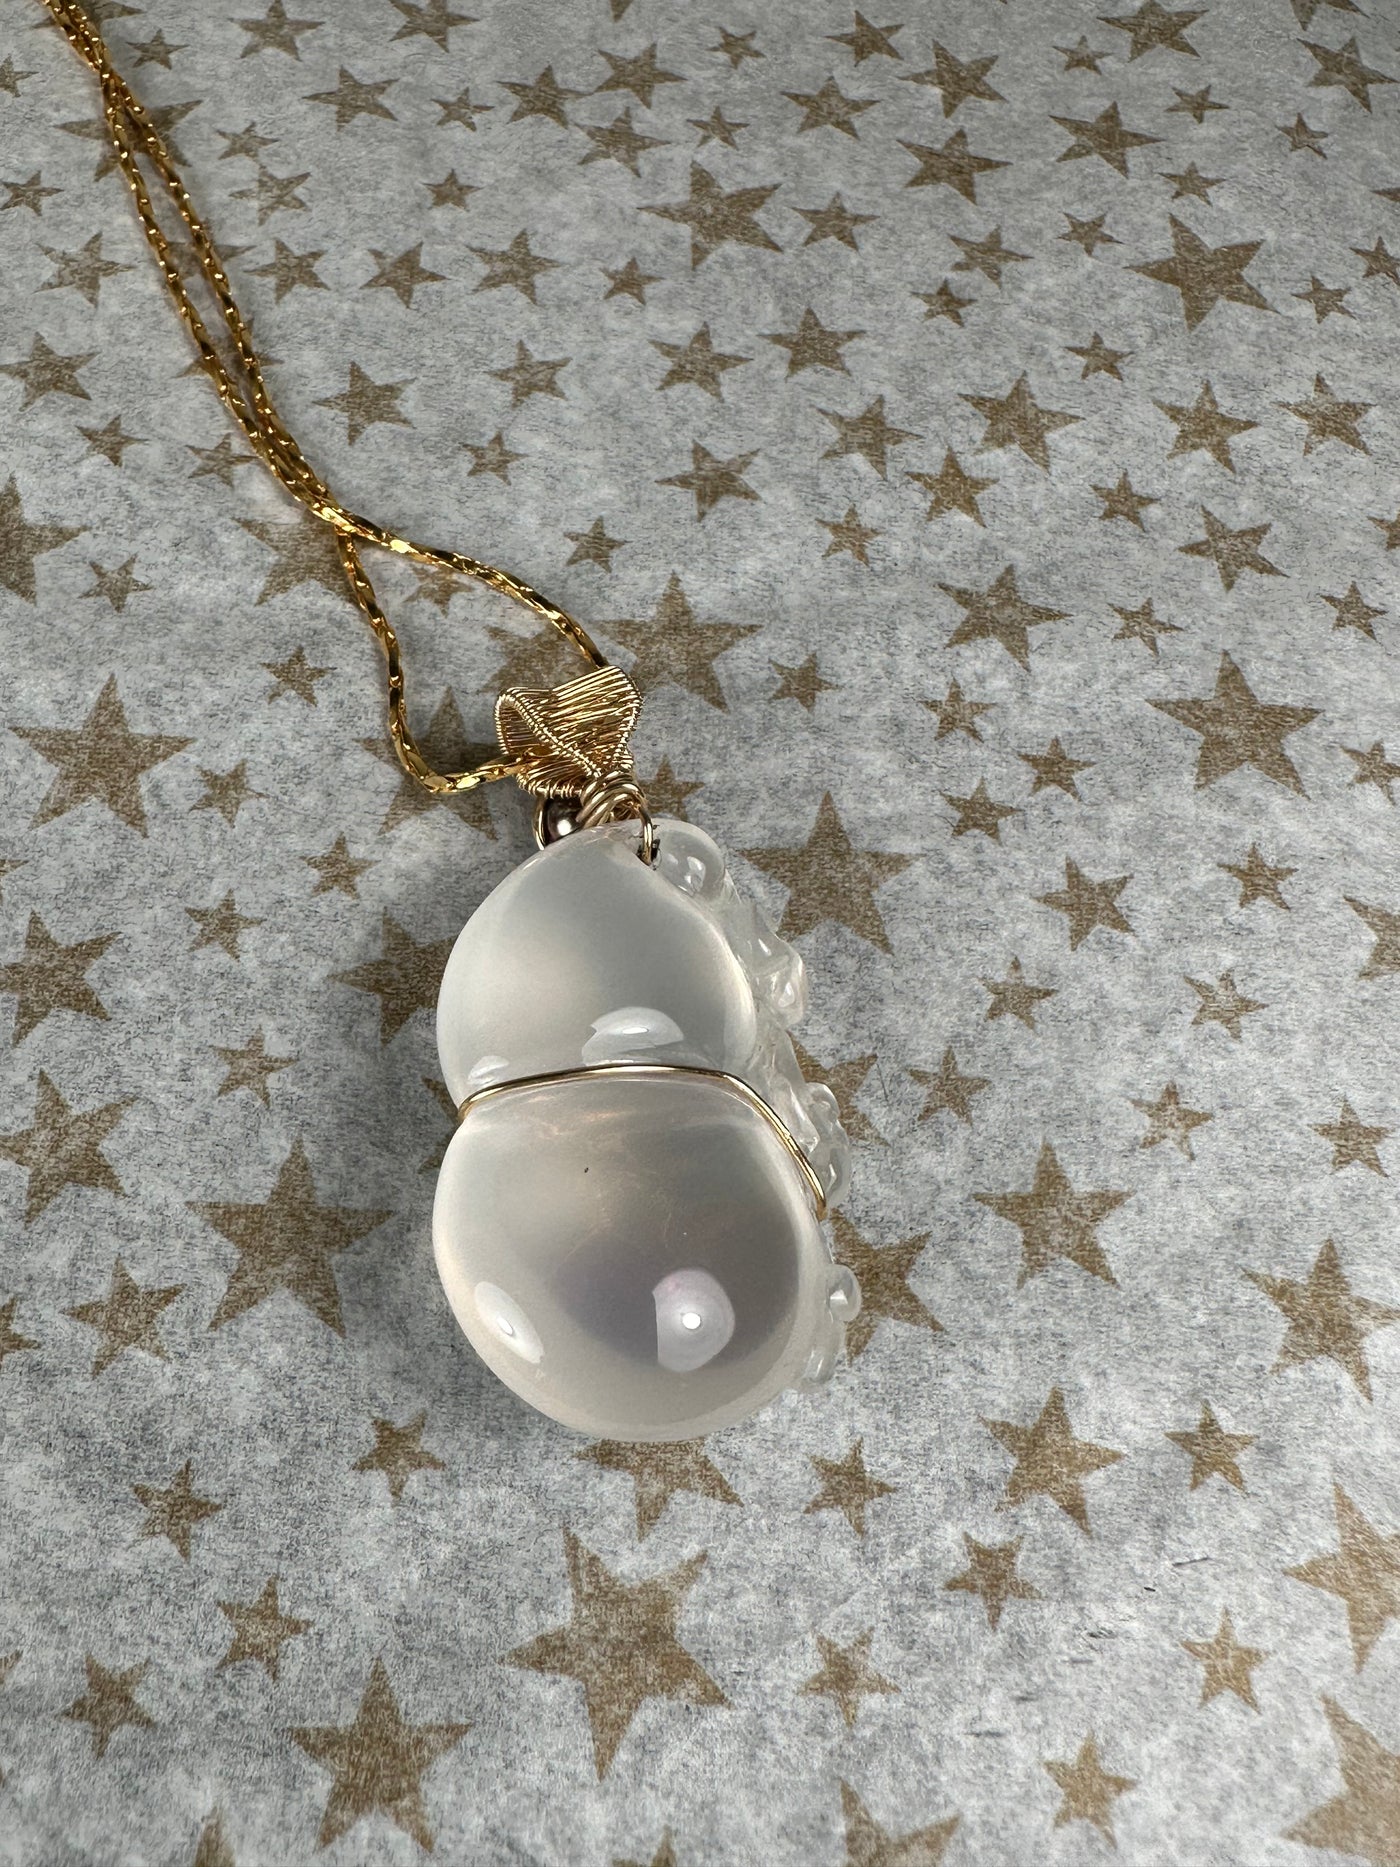 Milky Quartz and Multiple Gems Pendant Created by a Local Artist